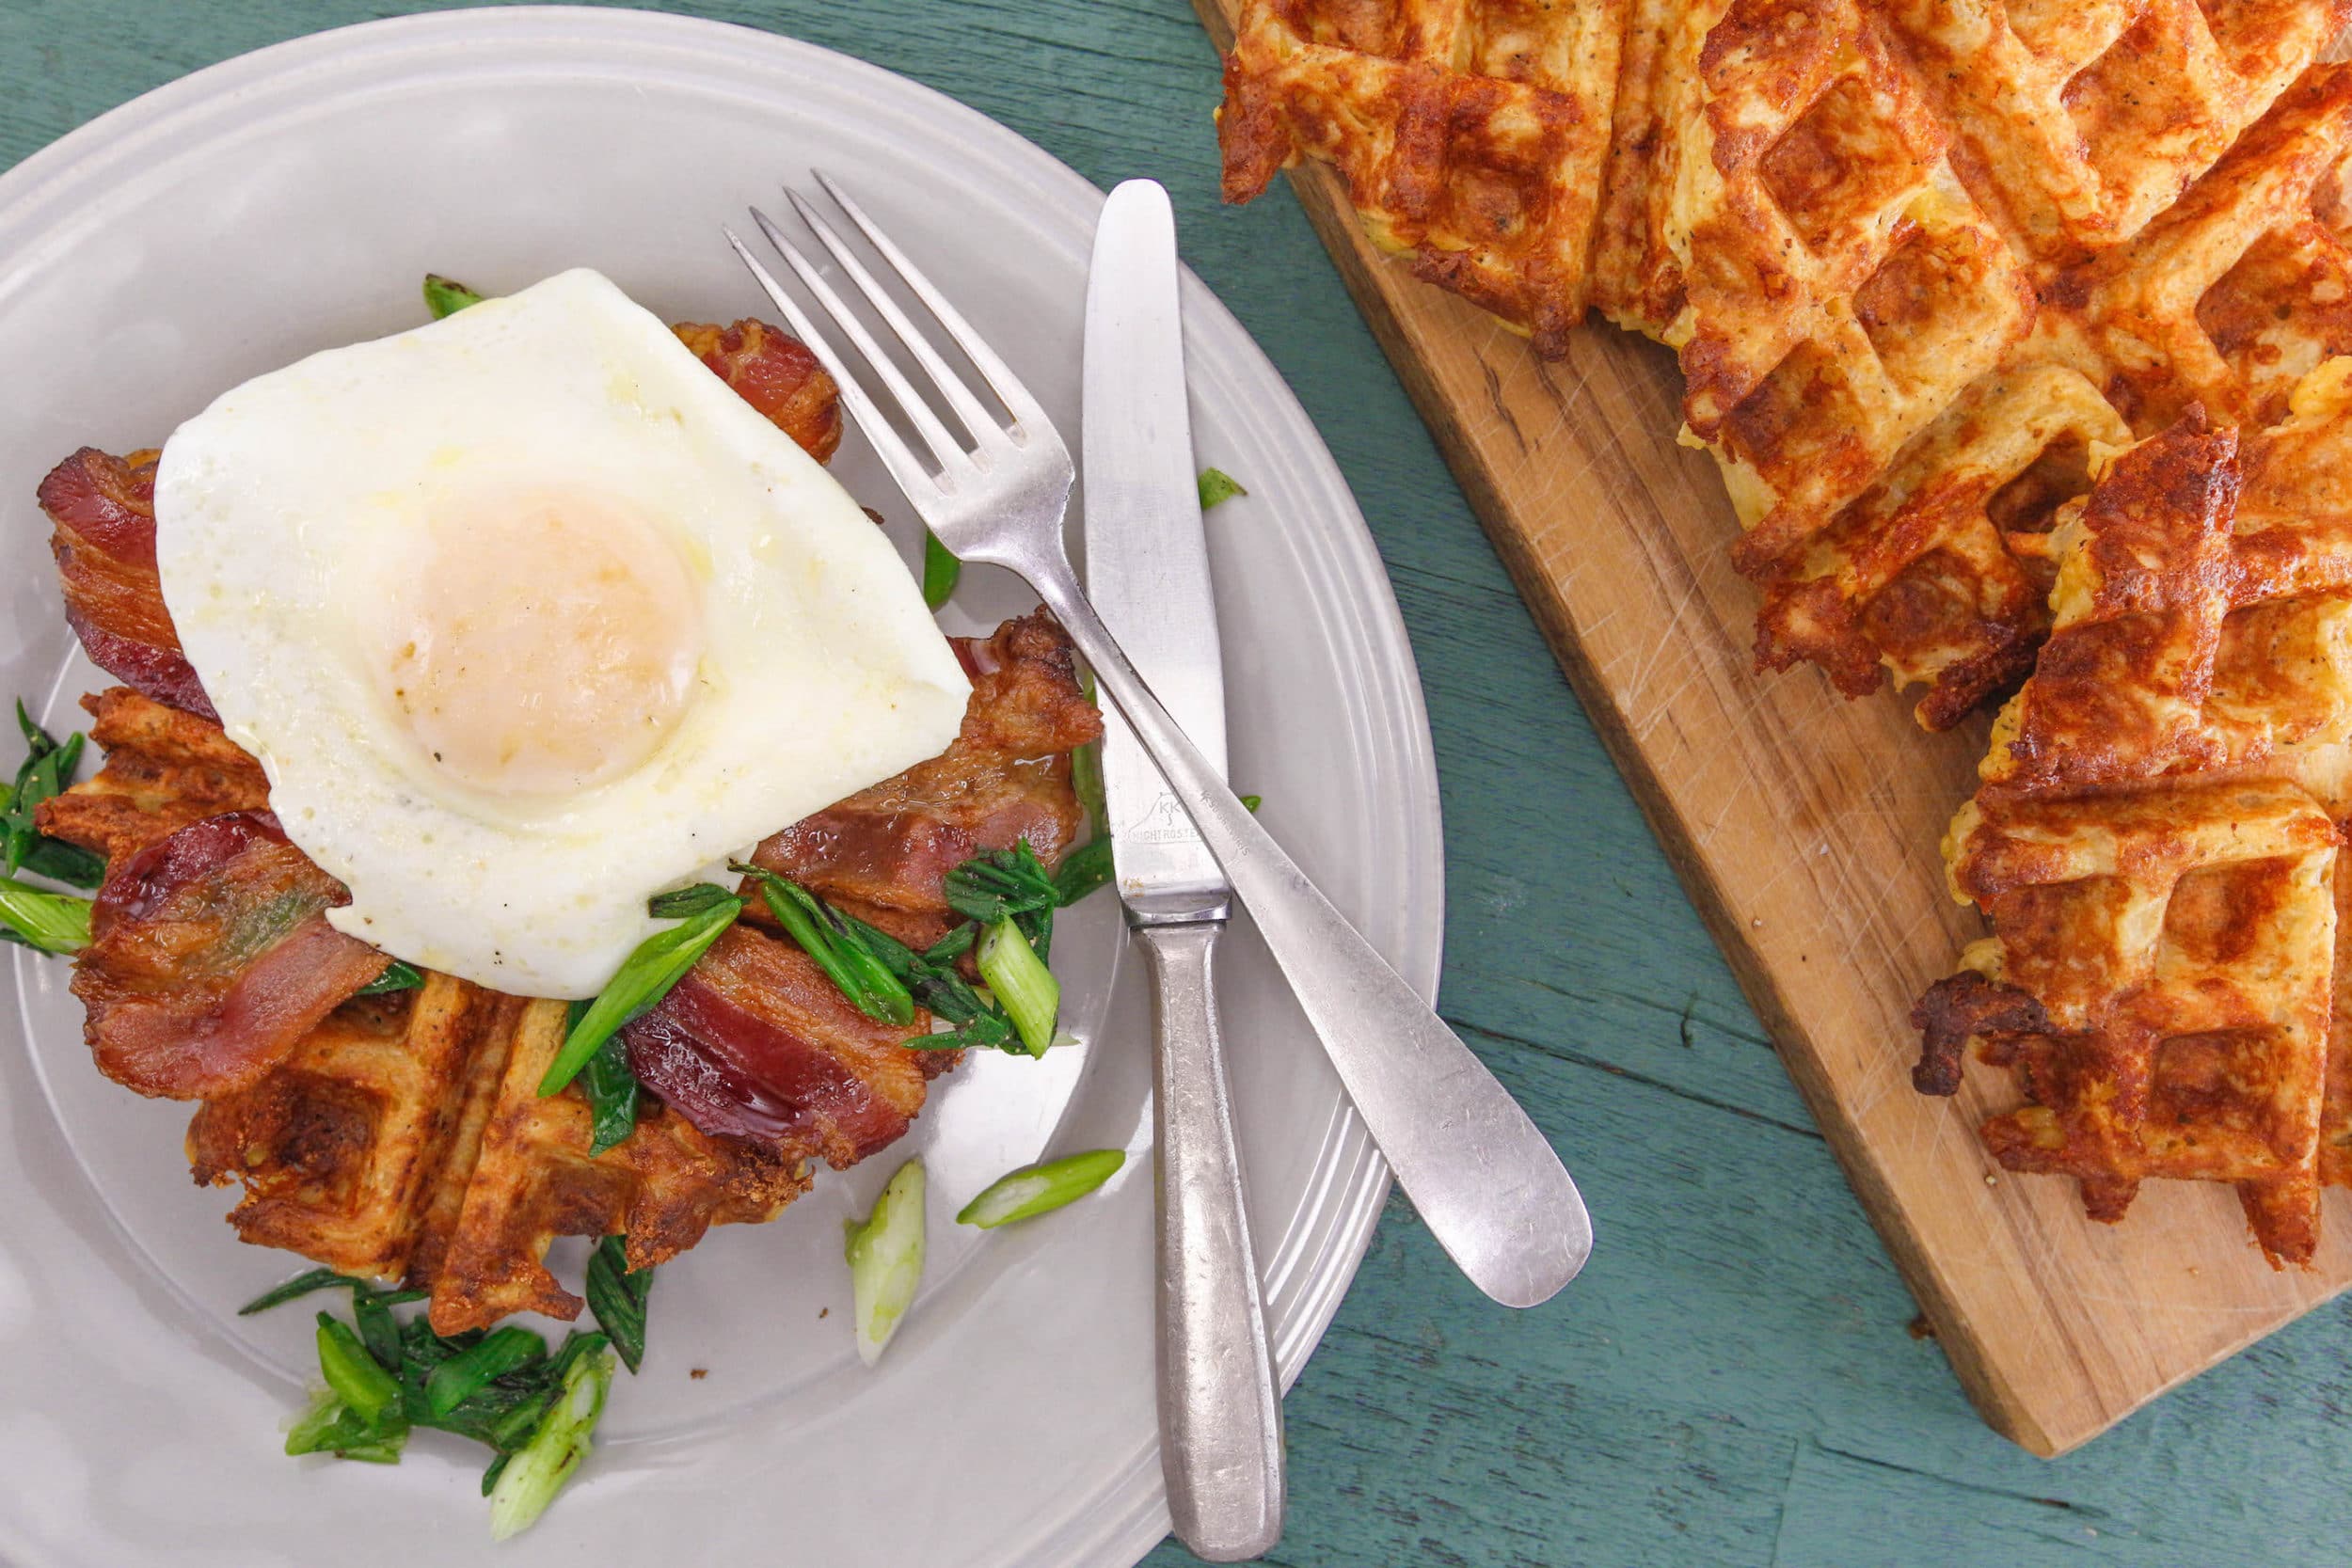 Rachael's Potato Waffles with Bacon, Eggs and Charred Green Onions